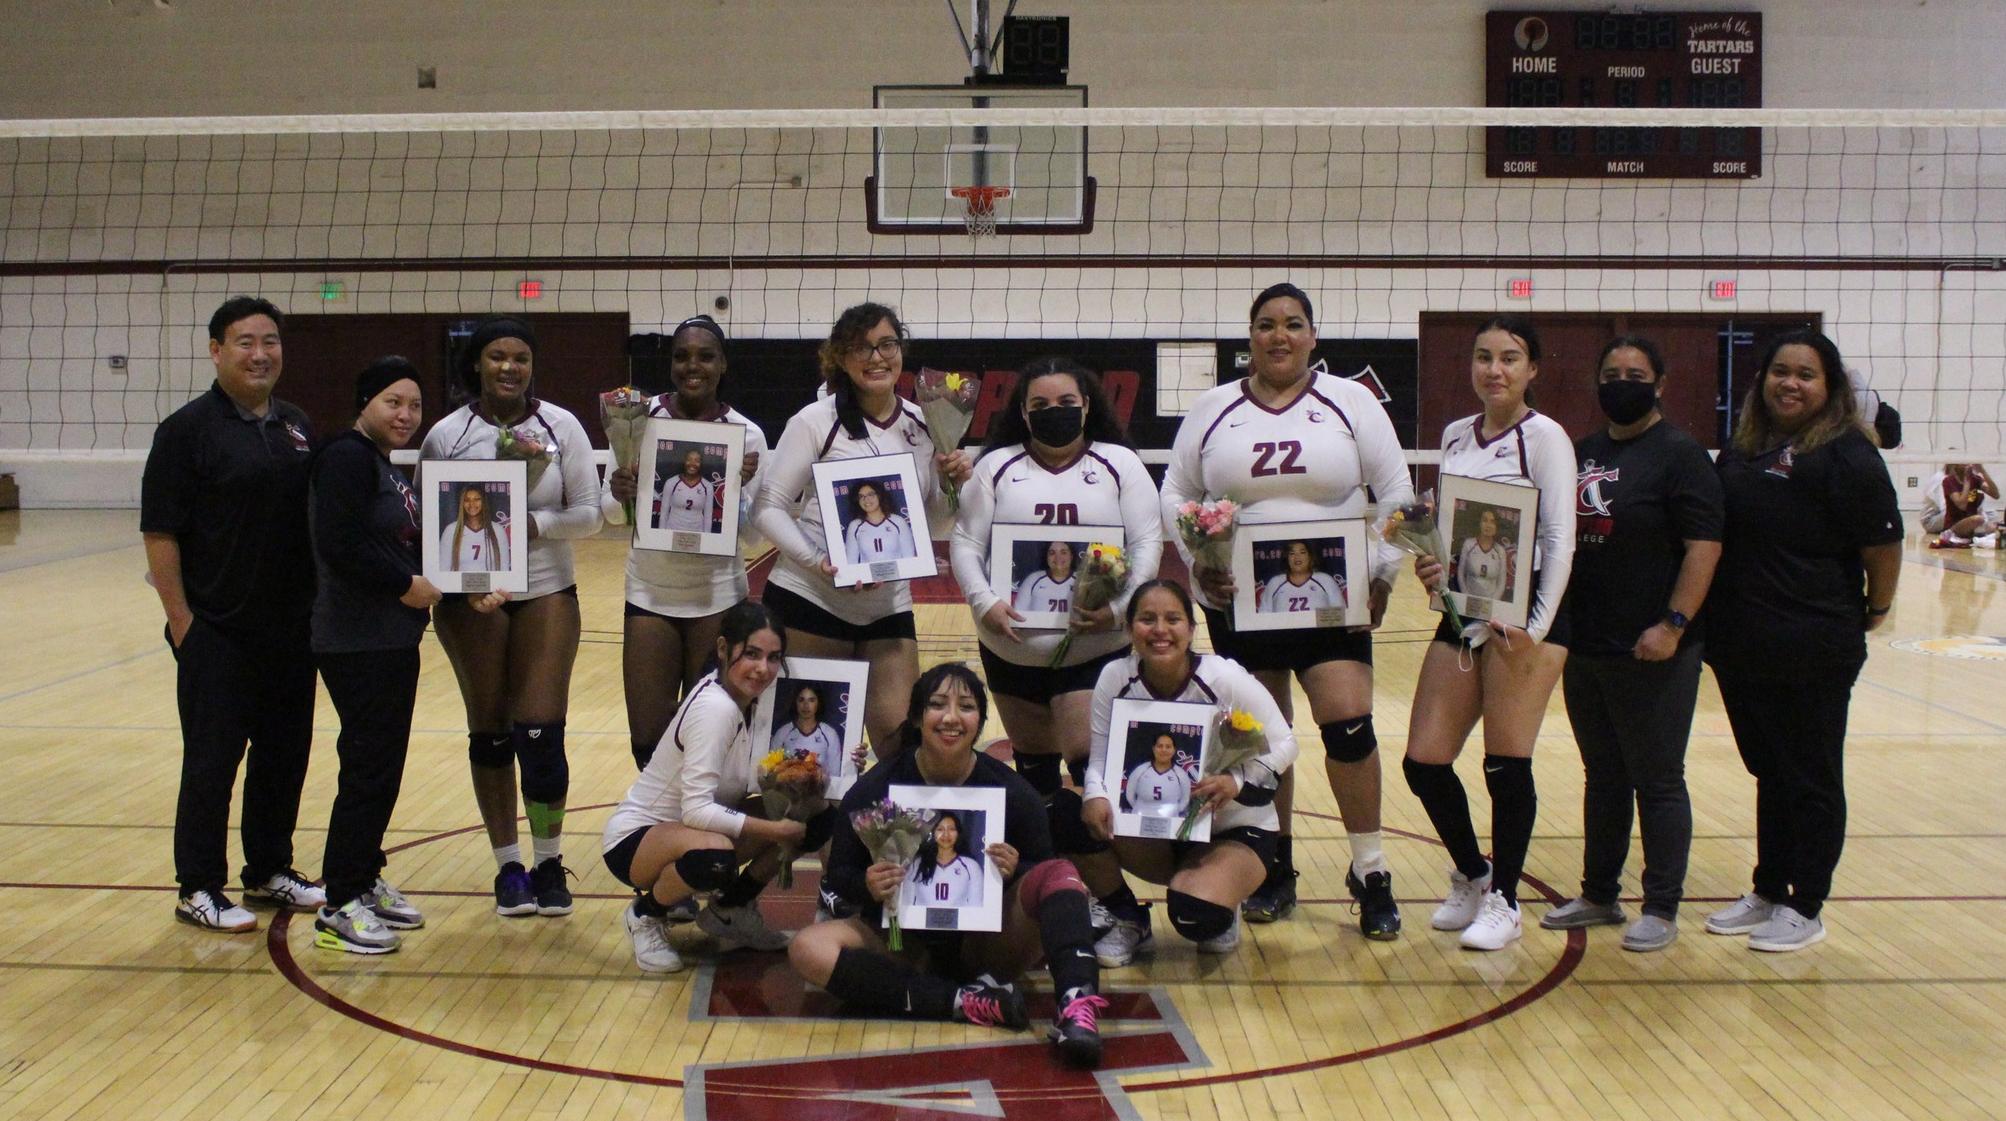 Women's Volleyball Completes Their Inaugural Season